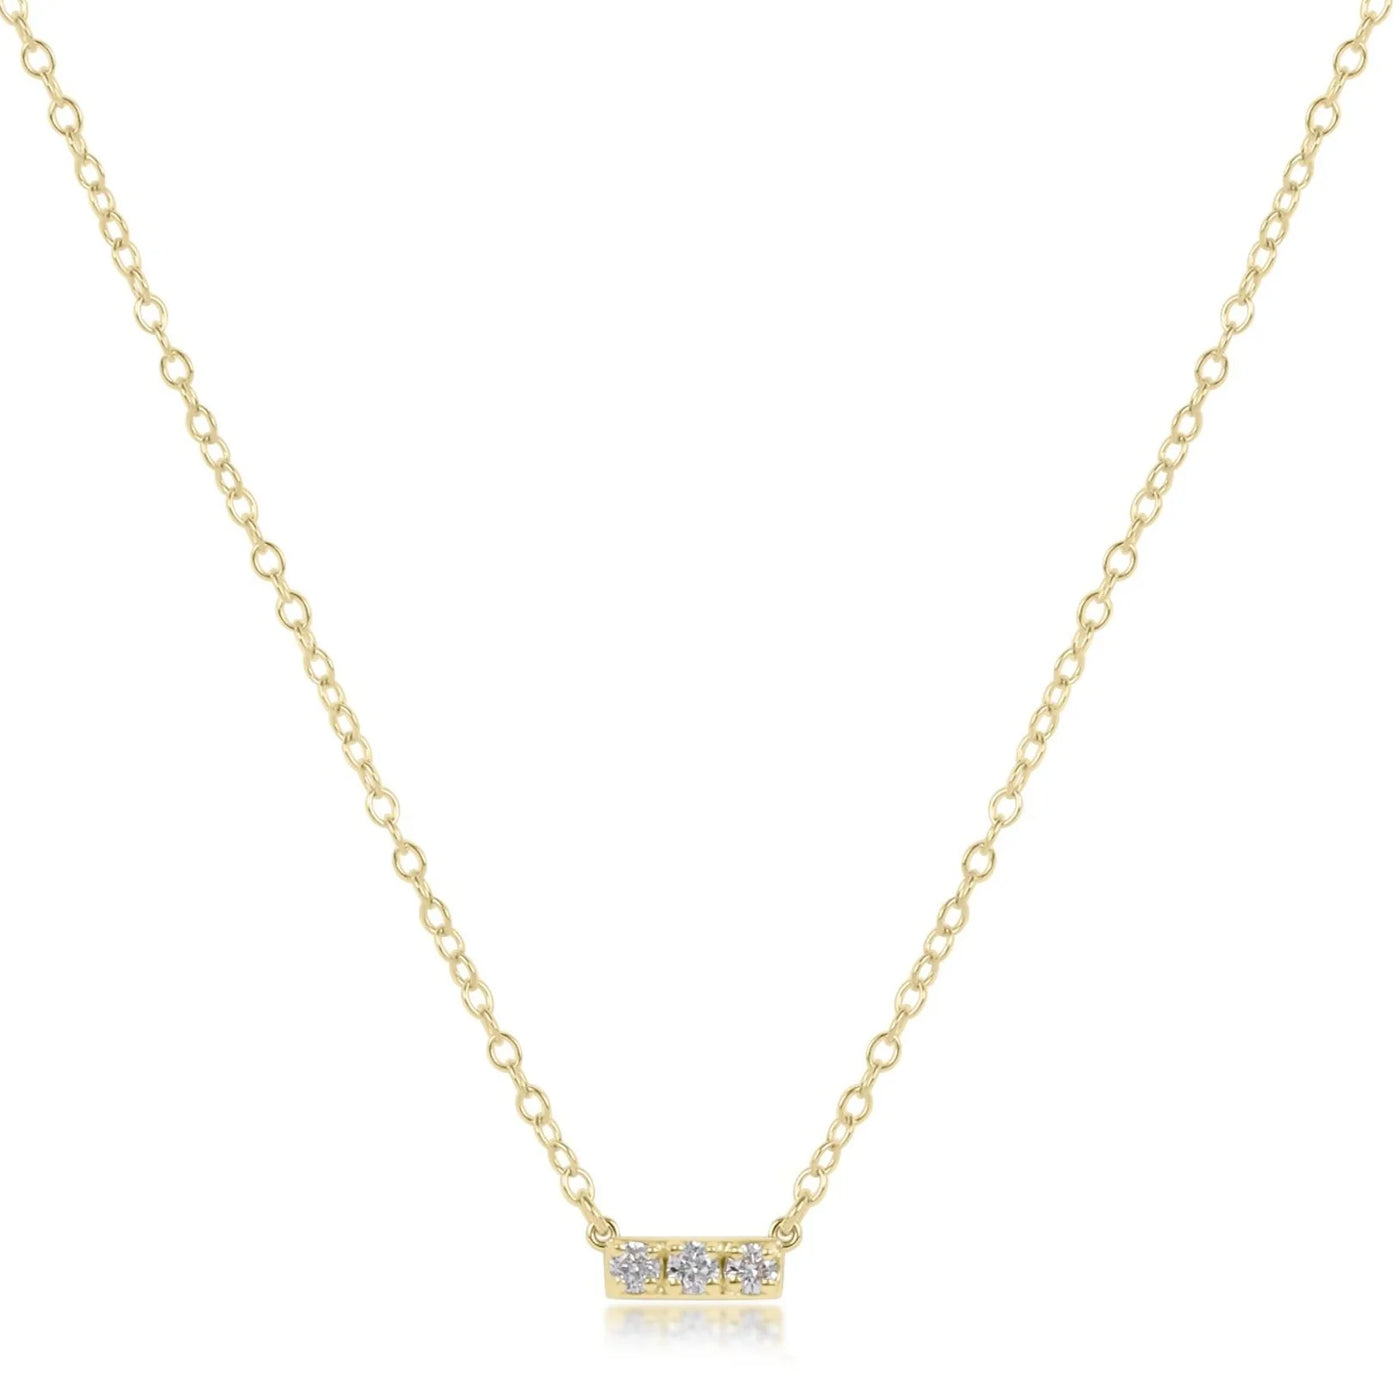 Enewton 14kt gold and diamond significance bar necklace - three